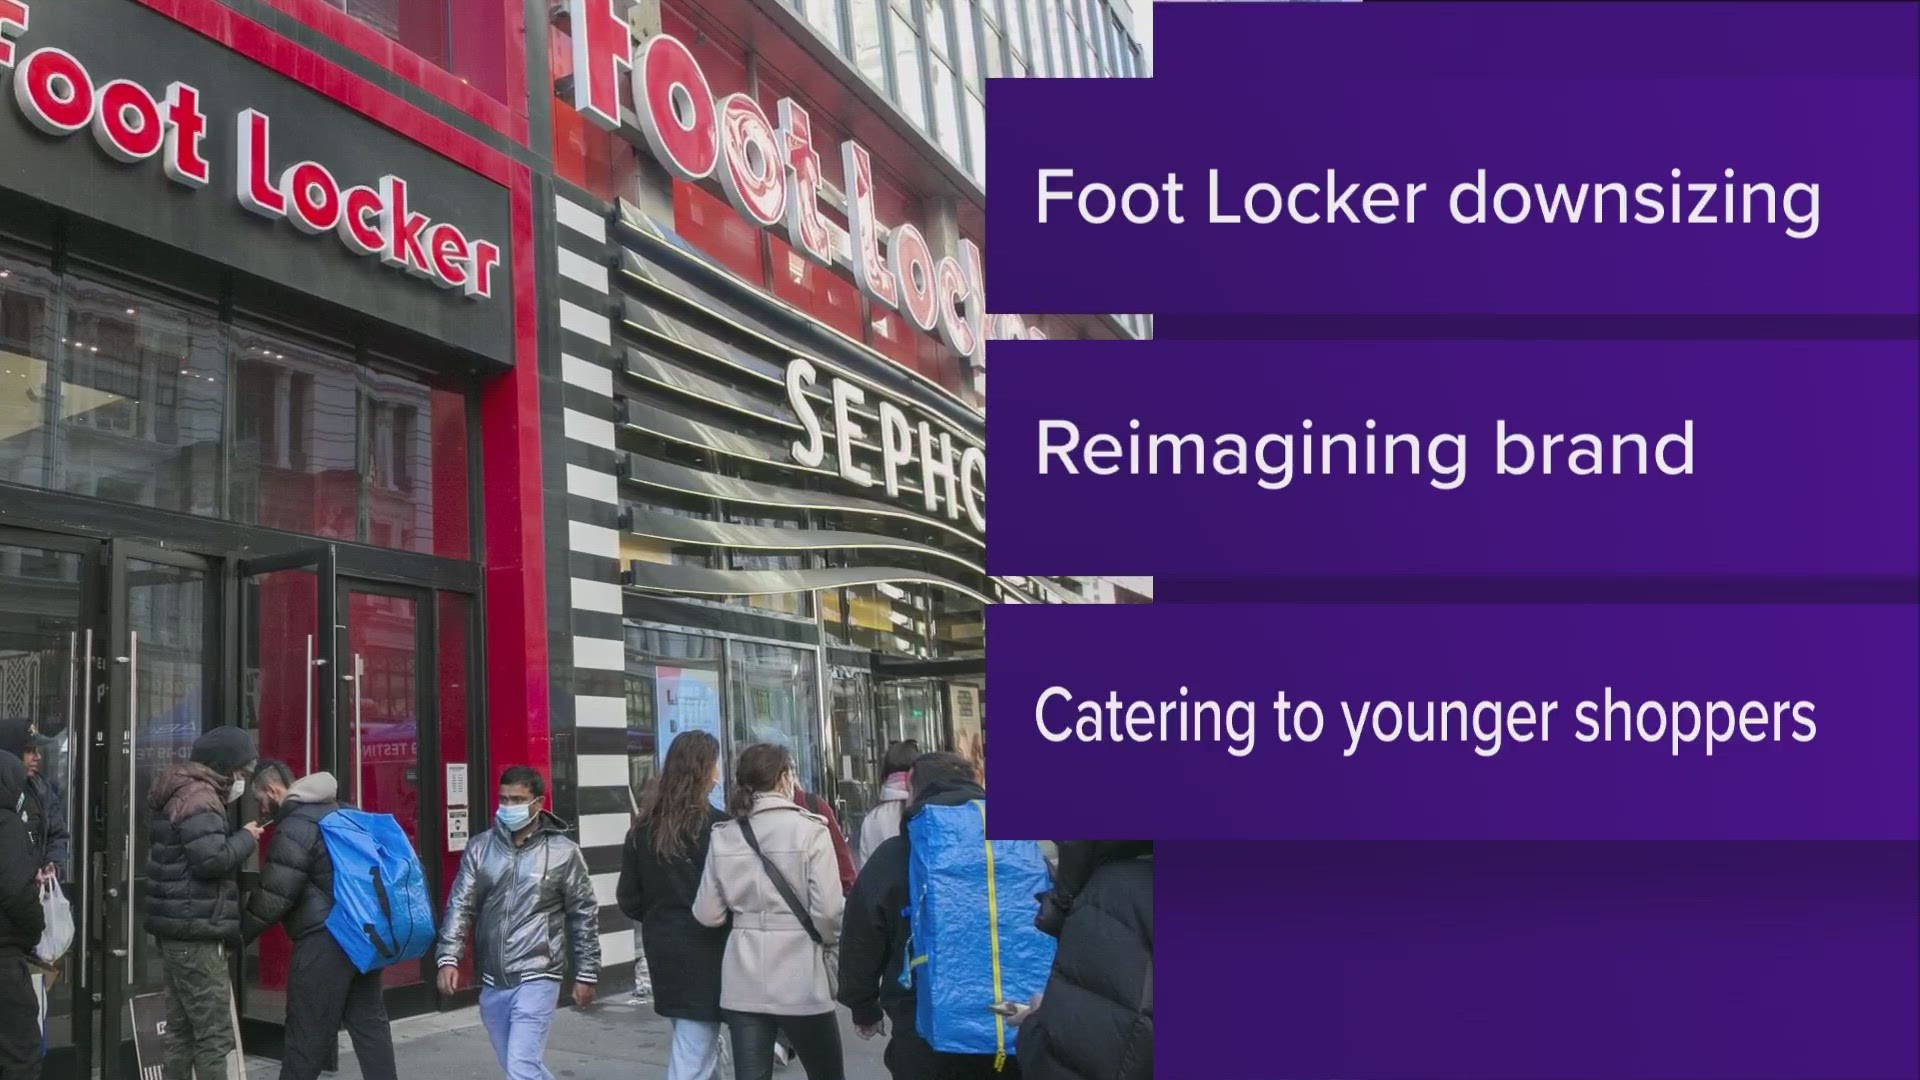 Foot Locker will be reimagining its brand to become more relevant to younger shoppers.